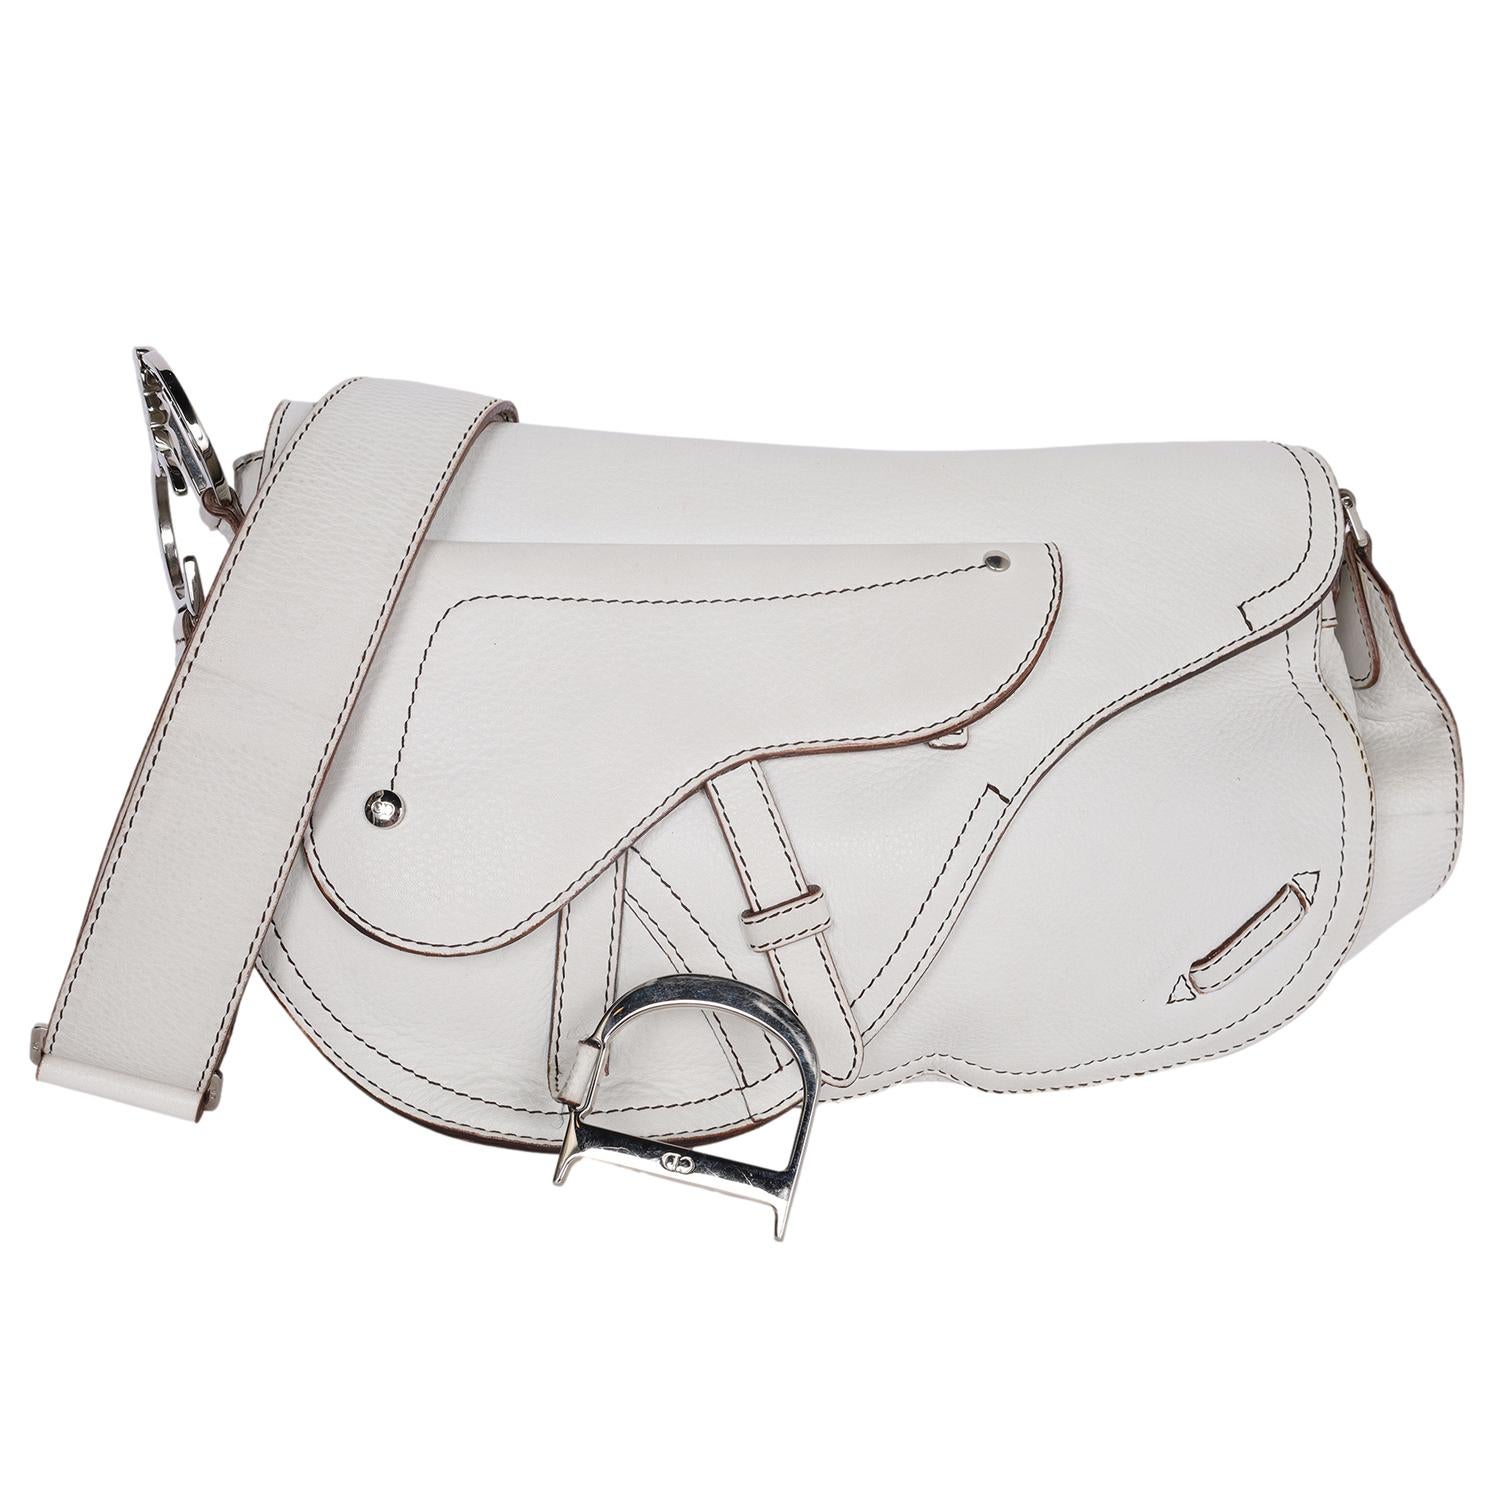 Christian Dior White Leather Saddle Messenger Crossbody Bag In Good Condition For Sale In Salt Lake Cty, UT